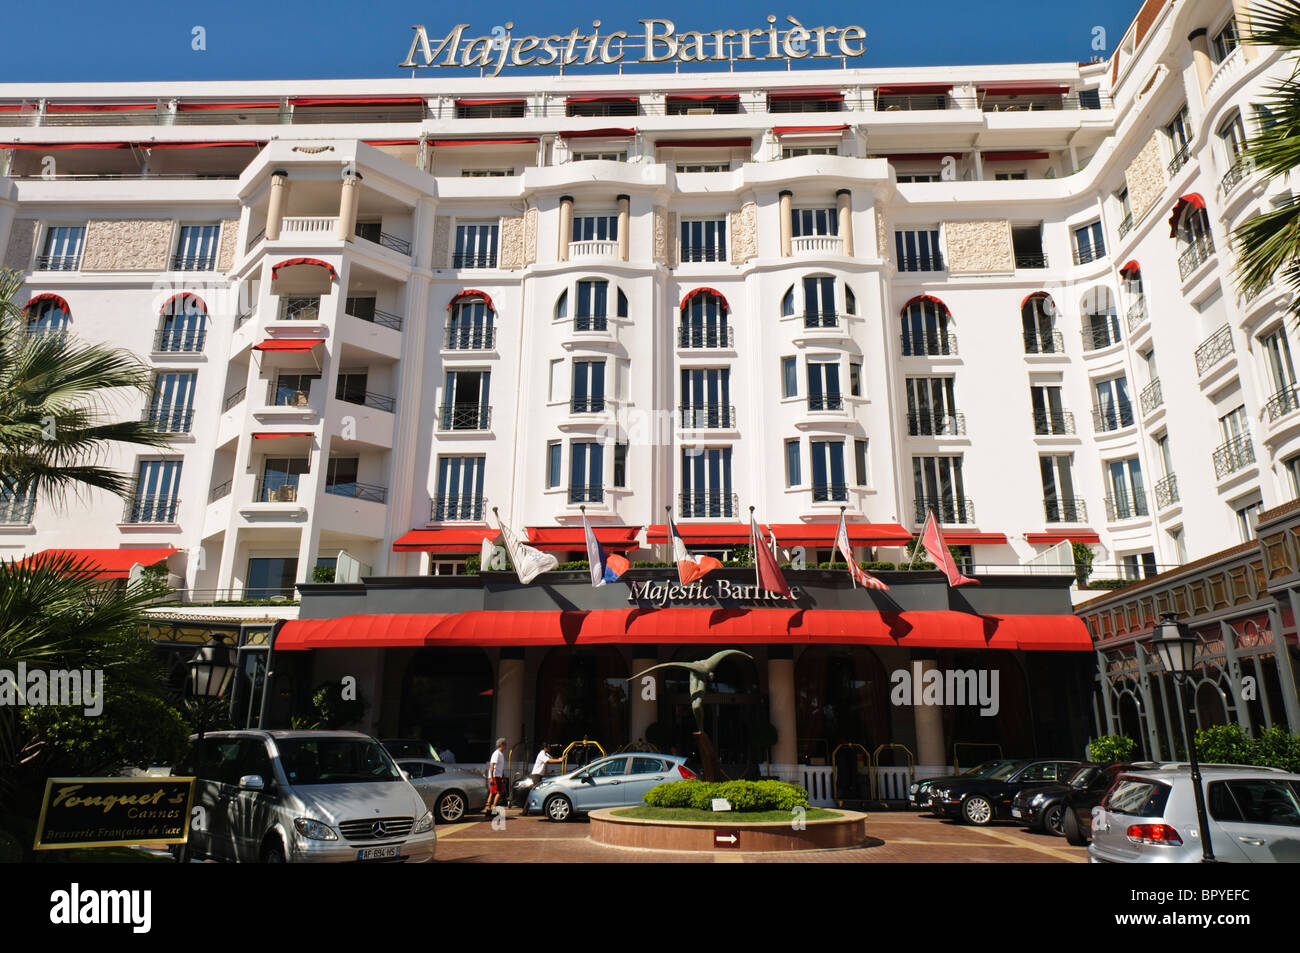 Majestic Barrière Hotel, Cannes Stock Photo